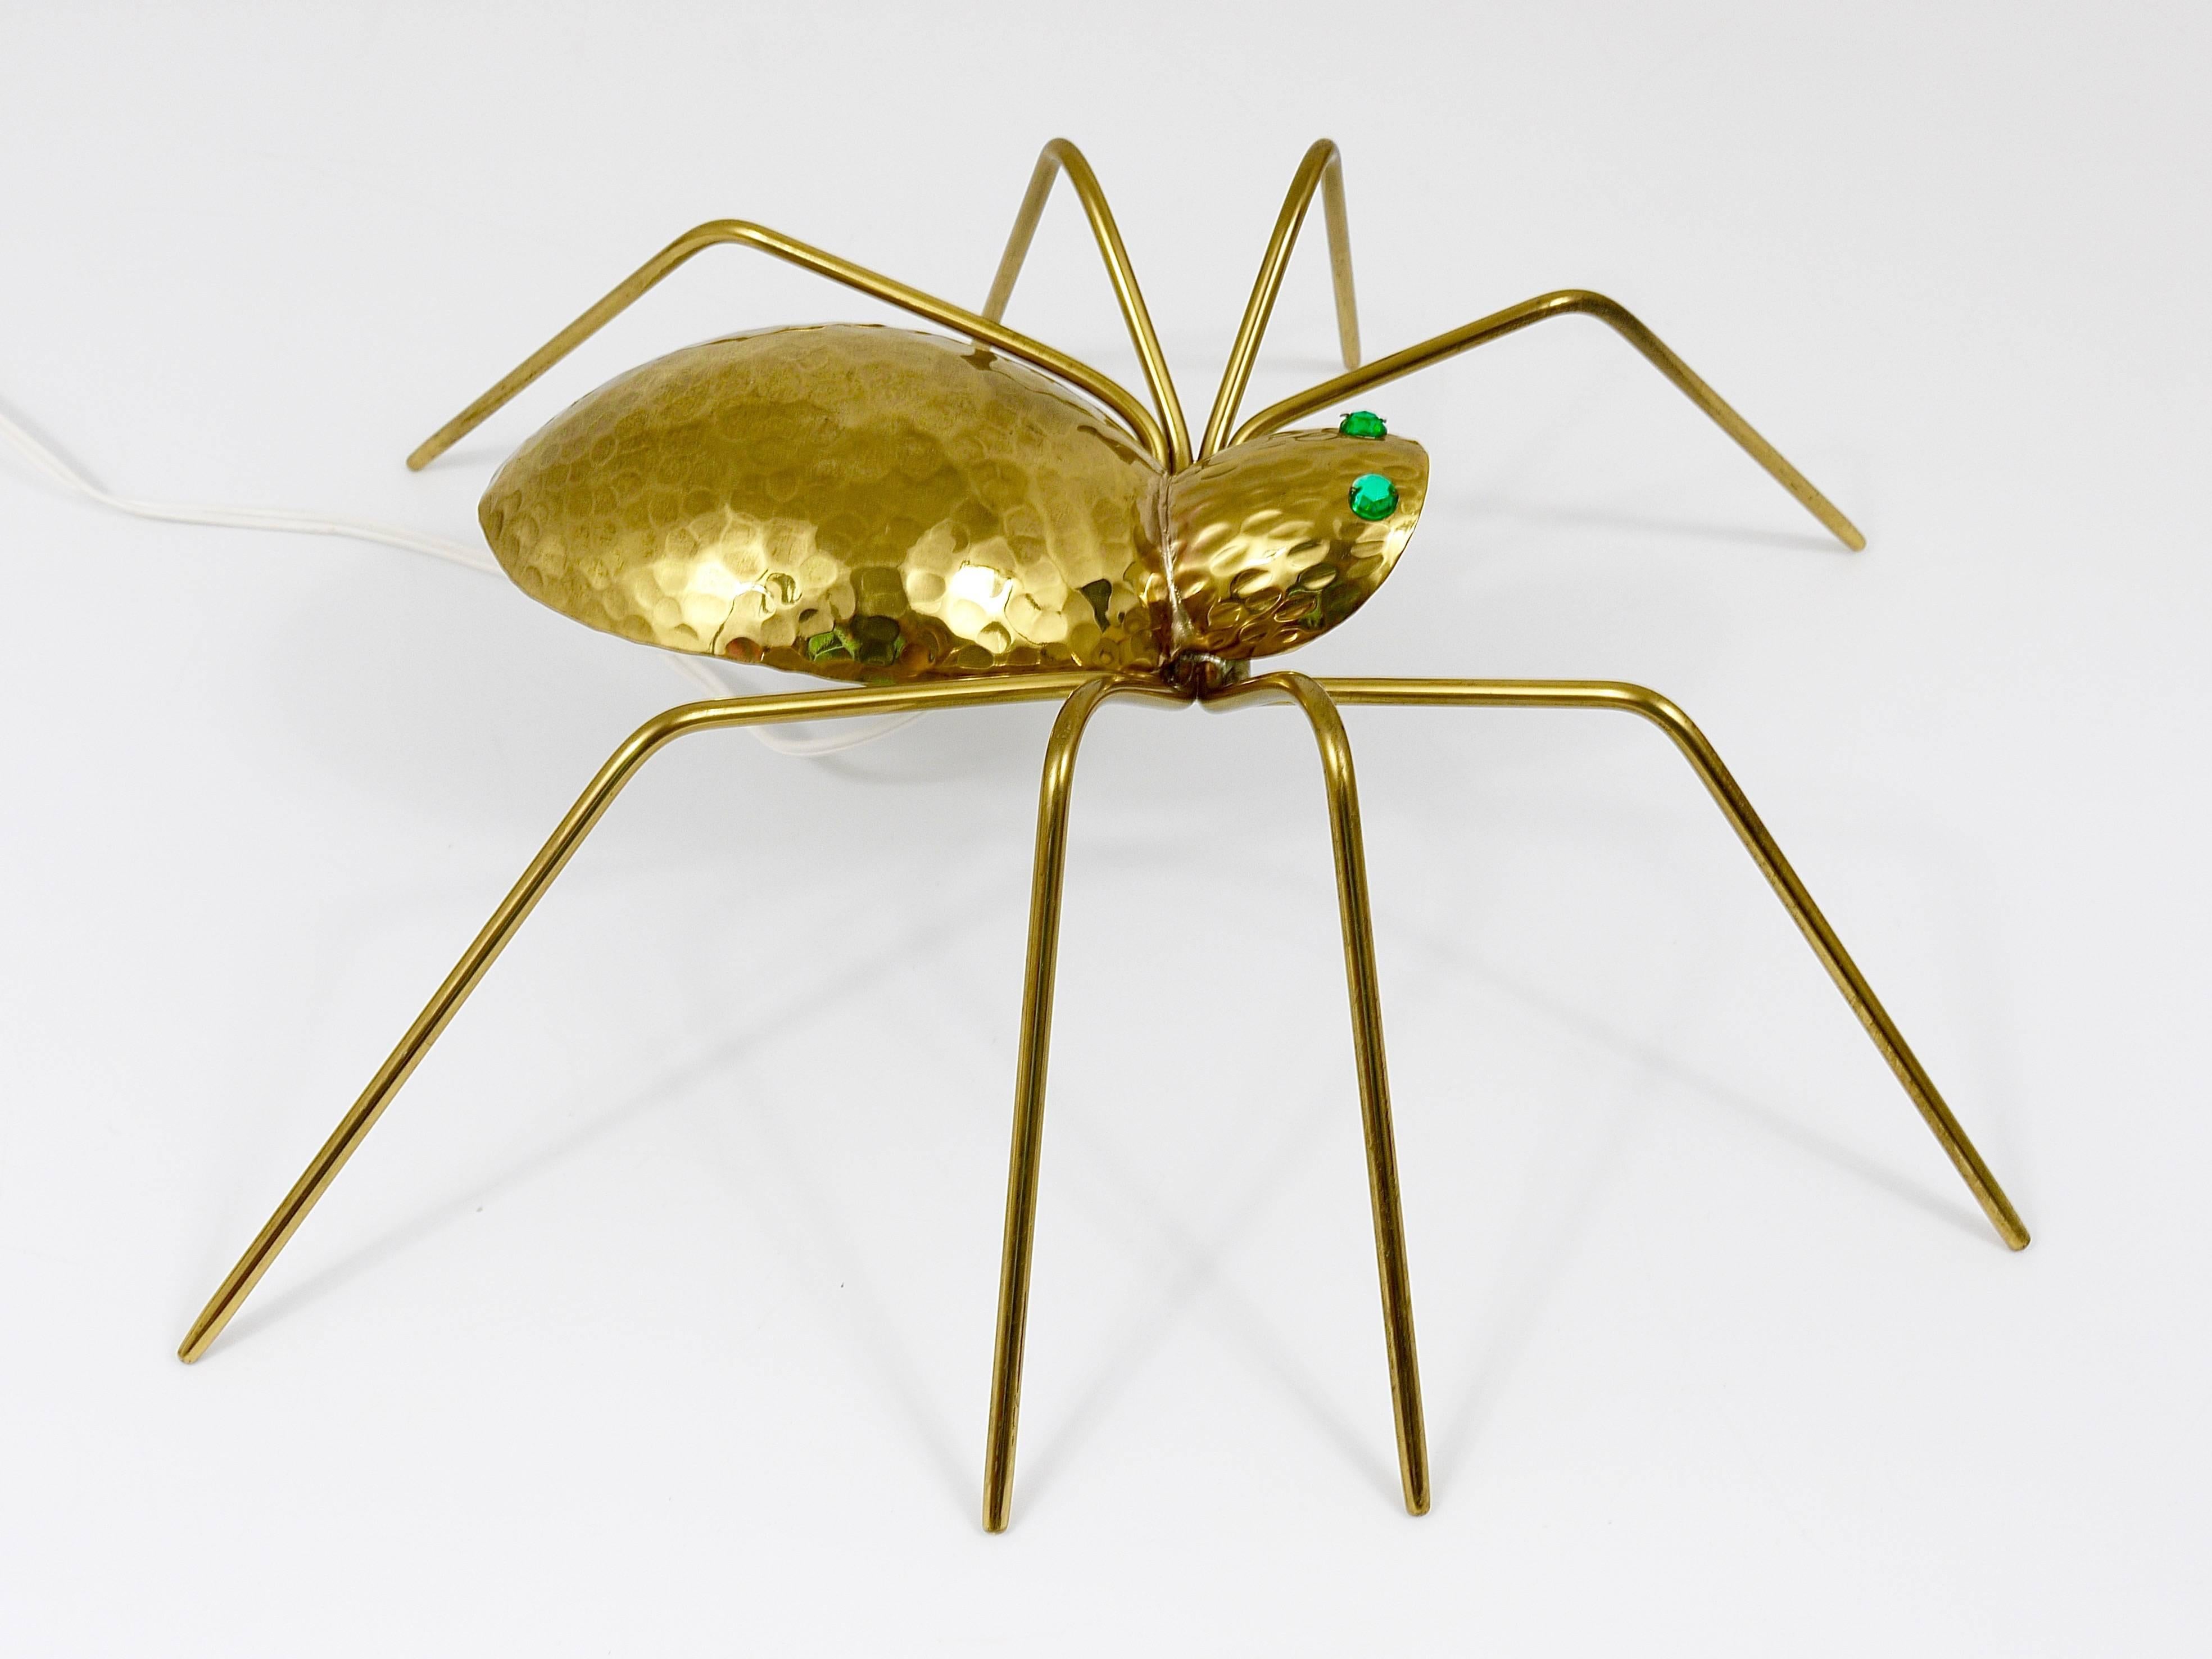 An exceptional handmade Mid-Century spider lamp, Austria, 1950s. To be used as a table lamp, side lamp or wall lamp or sconce. High-quality craftsmanship, made of Hammer-blown brass with faceted green crystal glass eyes. In excellent condition. A